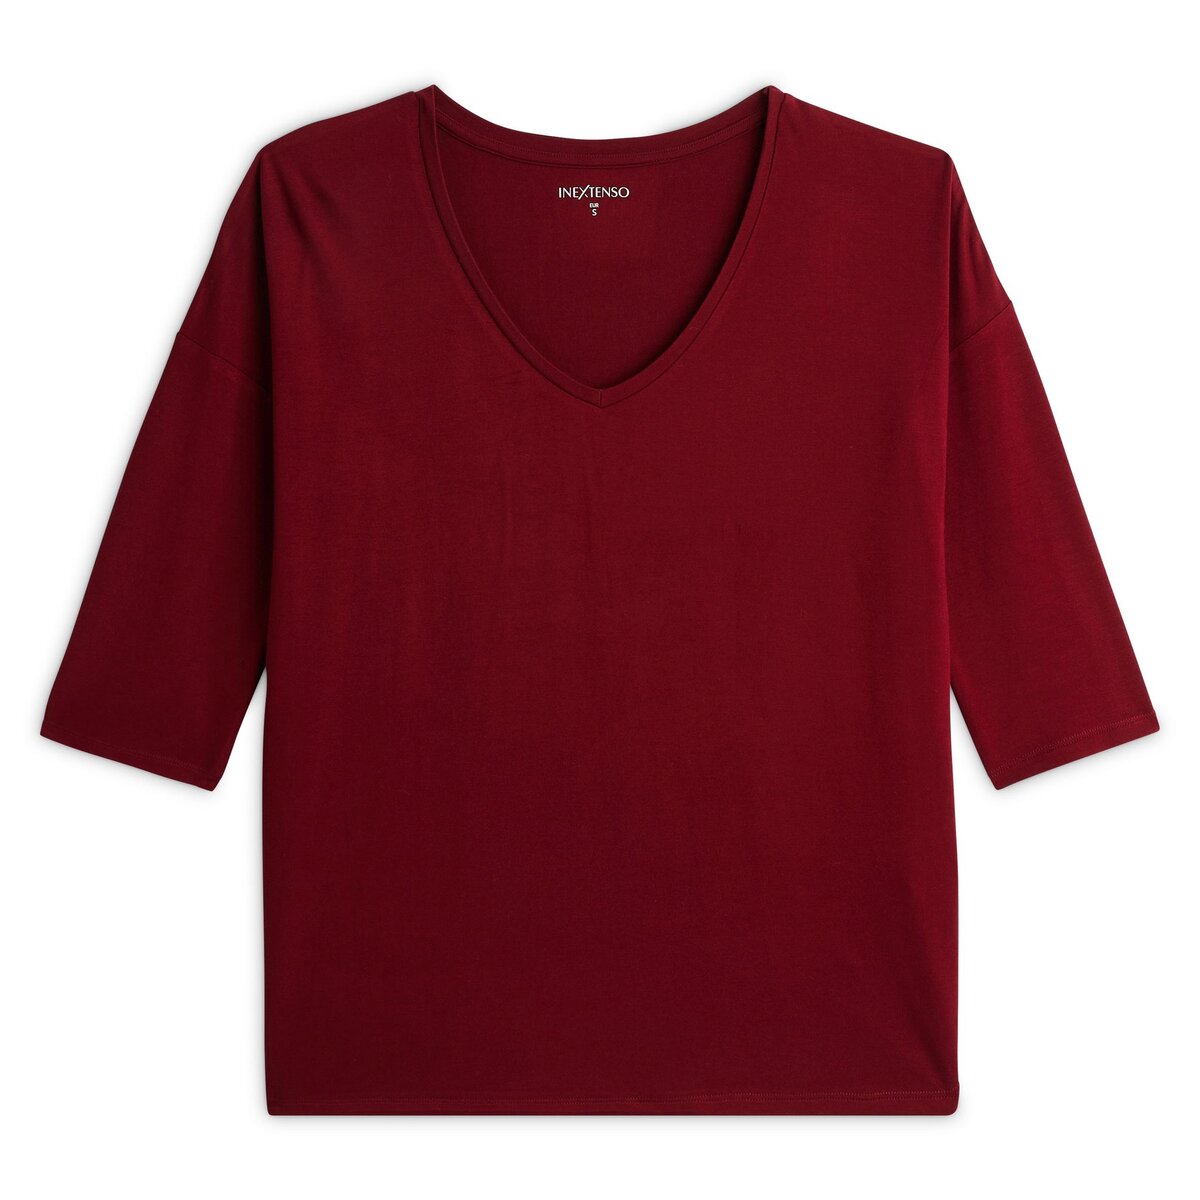 IN EXTENSO T-shirt manches longues col v rouge bordeaux femme